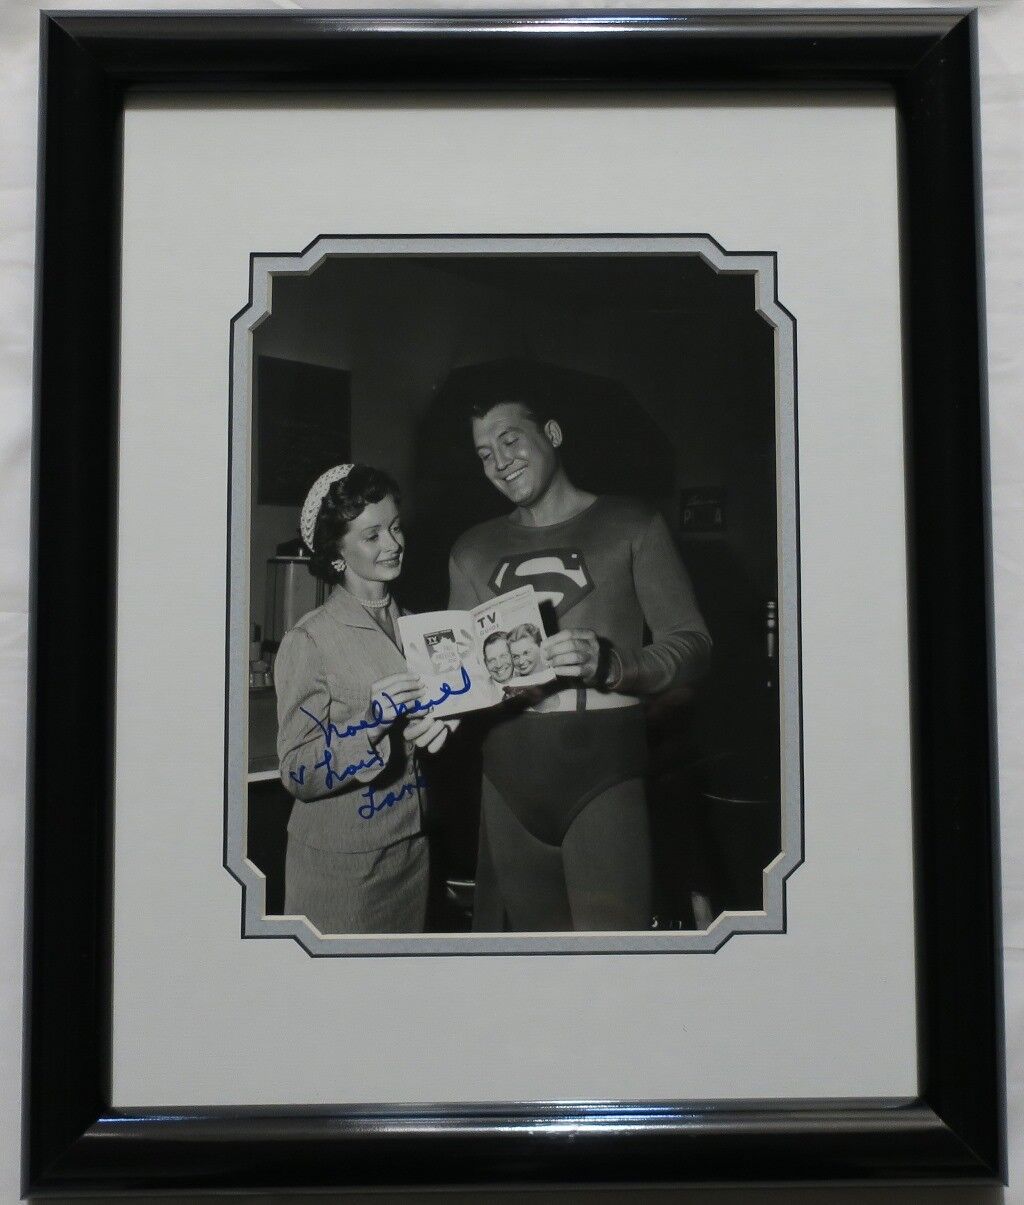 Noel Neill Signed Superman Authentic Autographed 8x10 Photo Poster painting Framed JSA #T21179